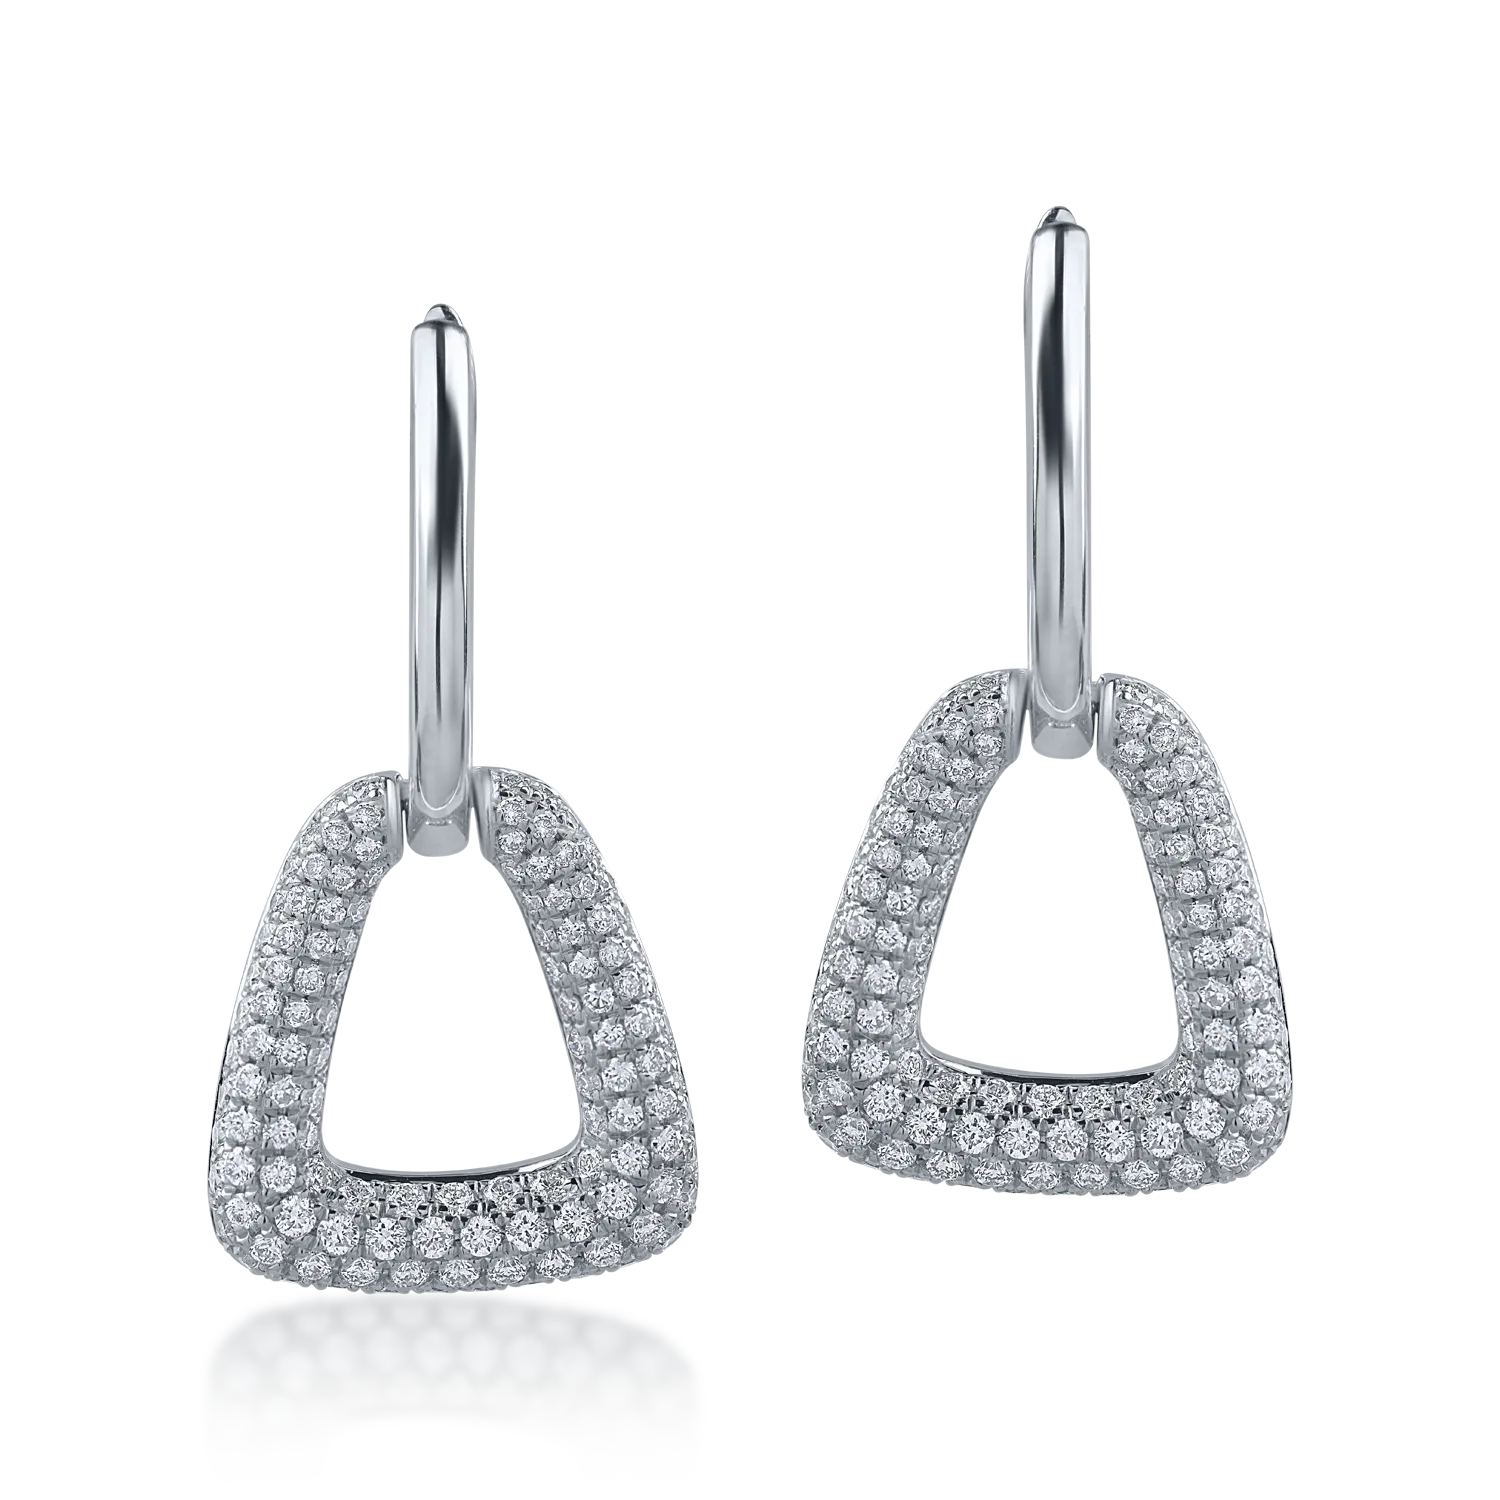 White gold earrings with 1.02ct diamonds